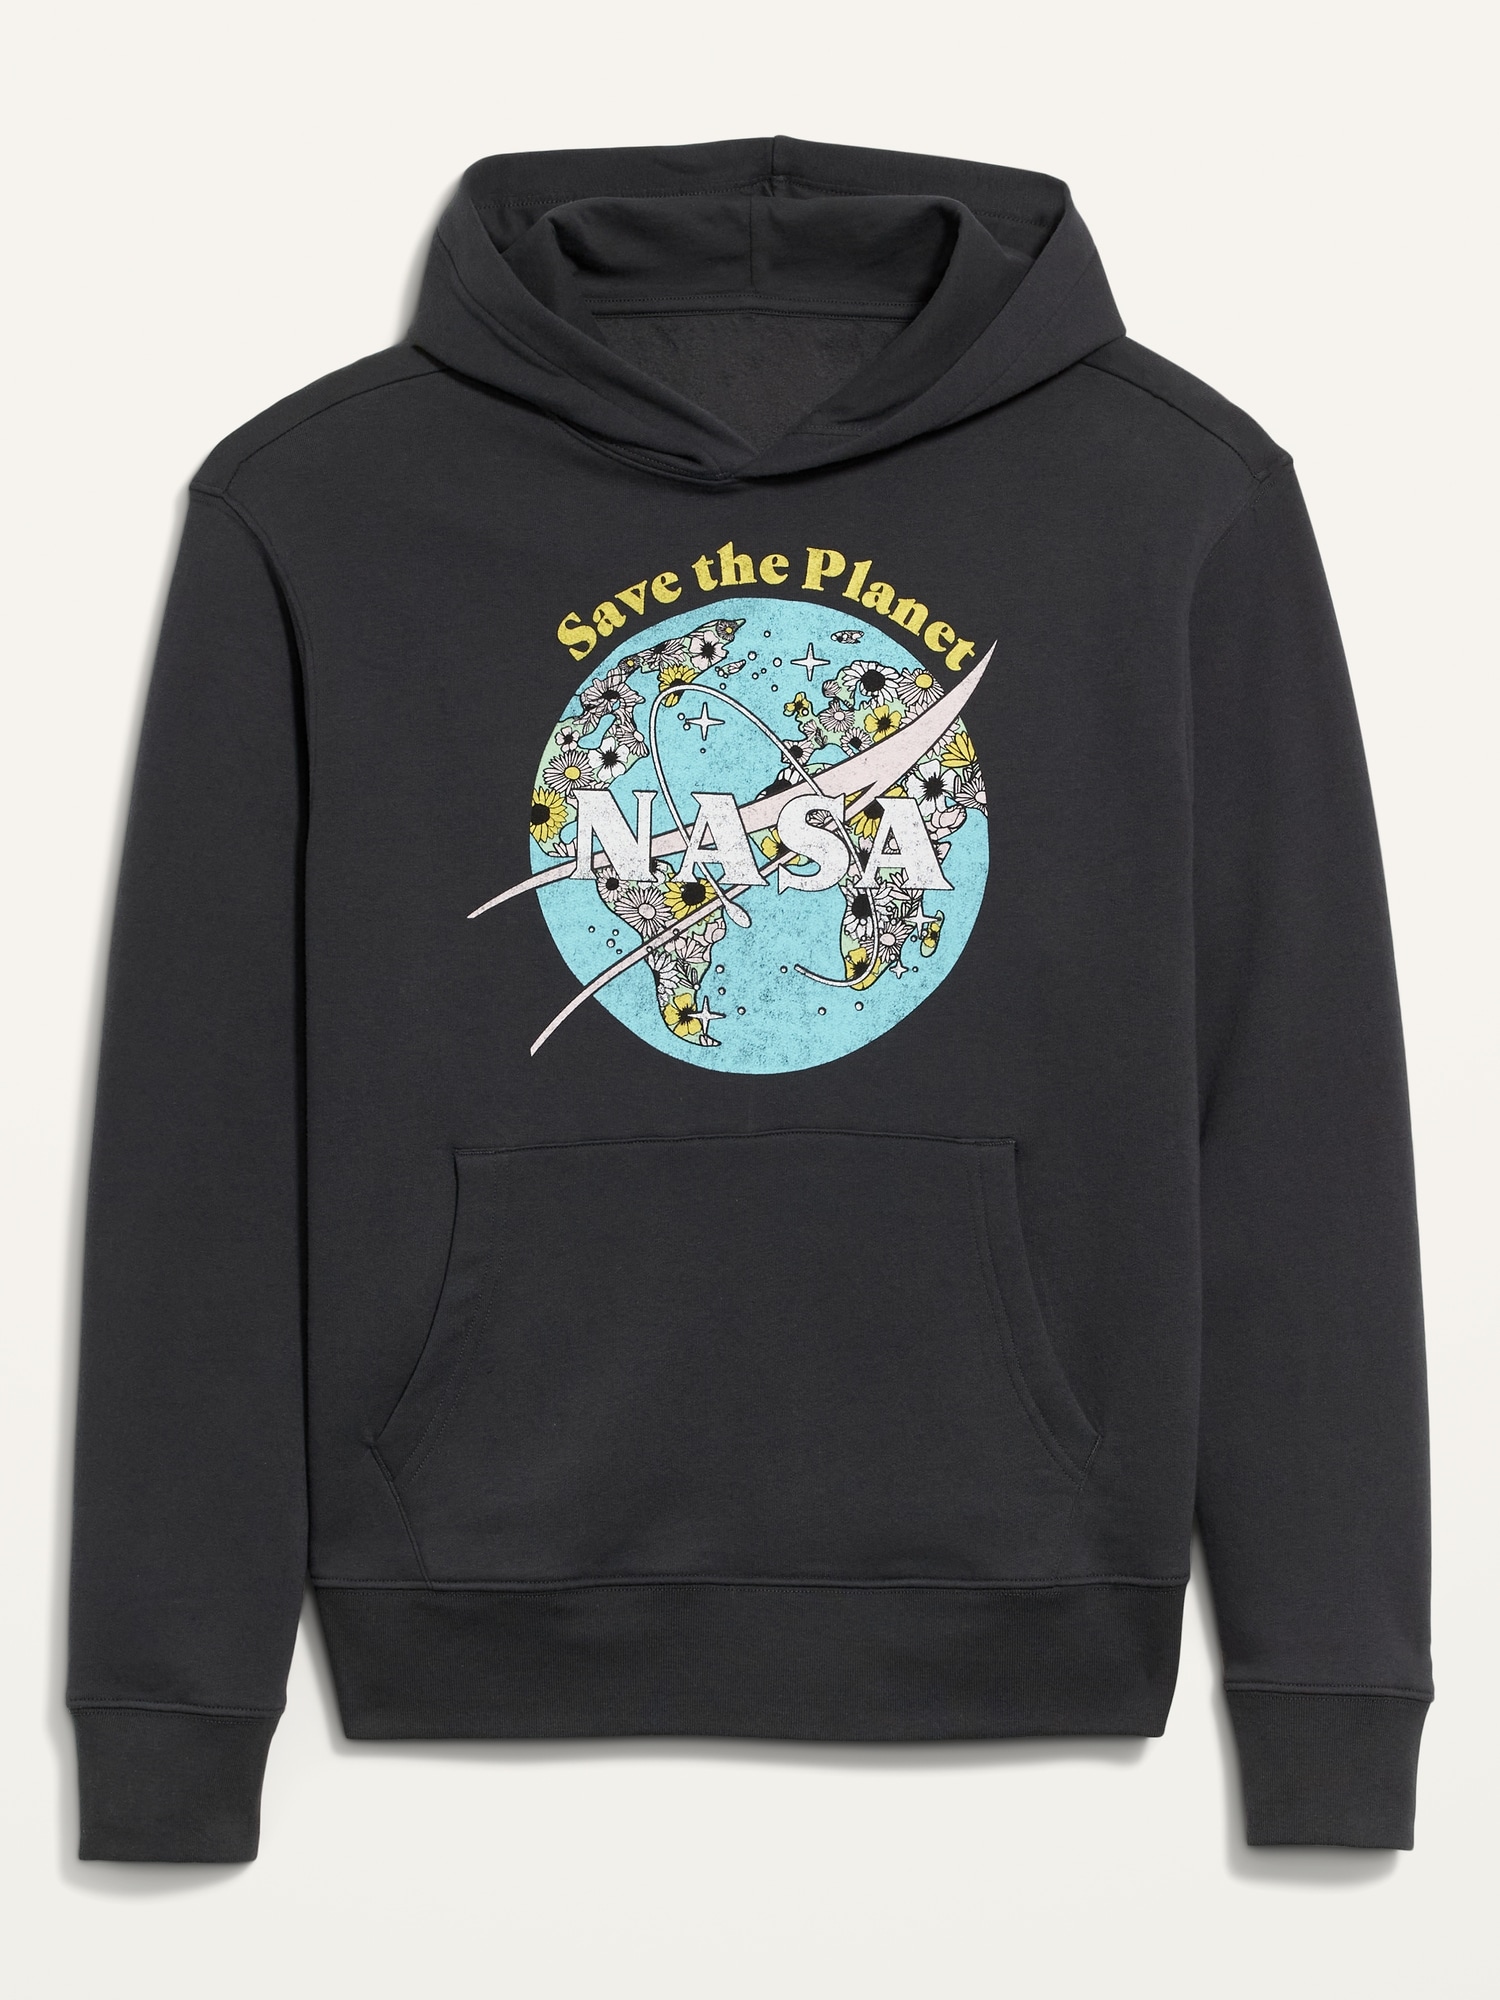 Old Navy NASA "Save the Planet" Gender-Neutral Pullover Hoodie for Adults black. 1